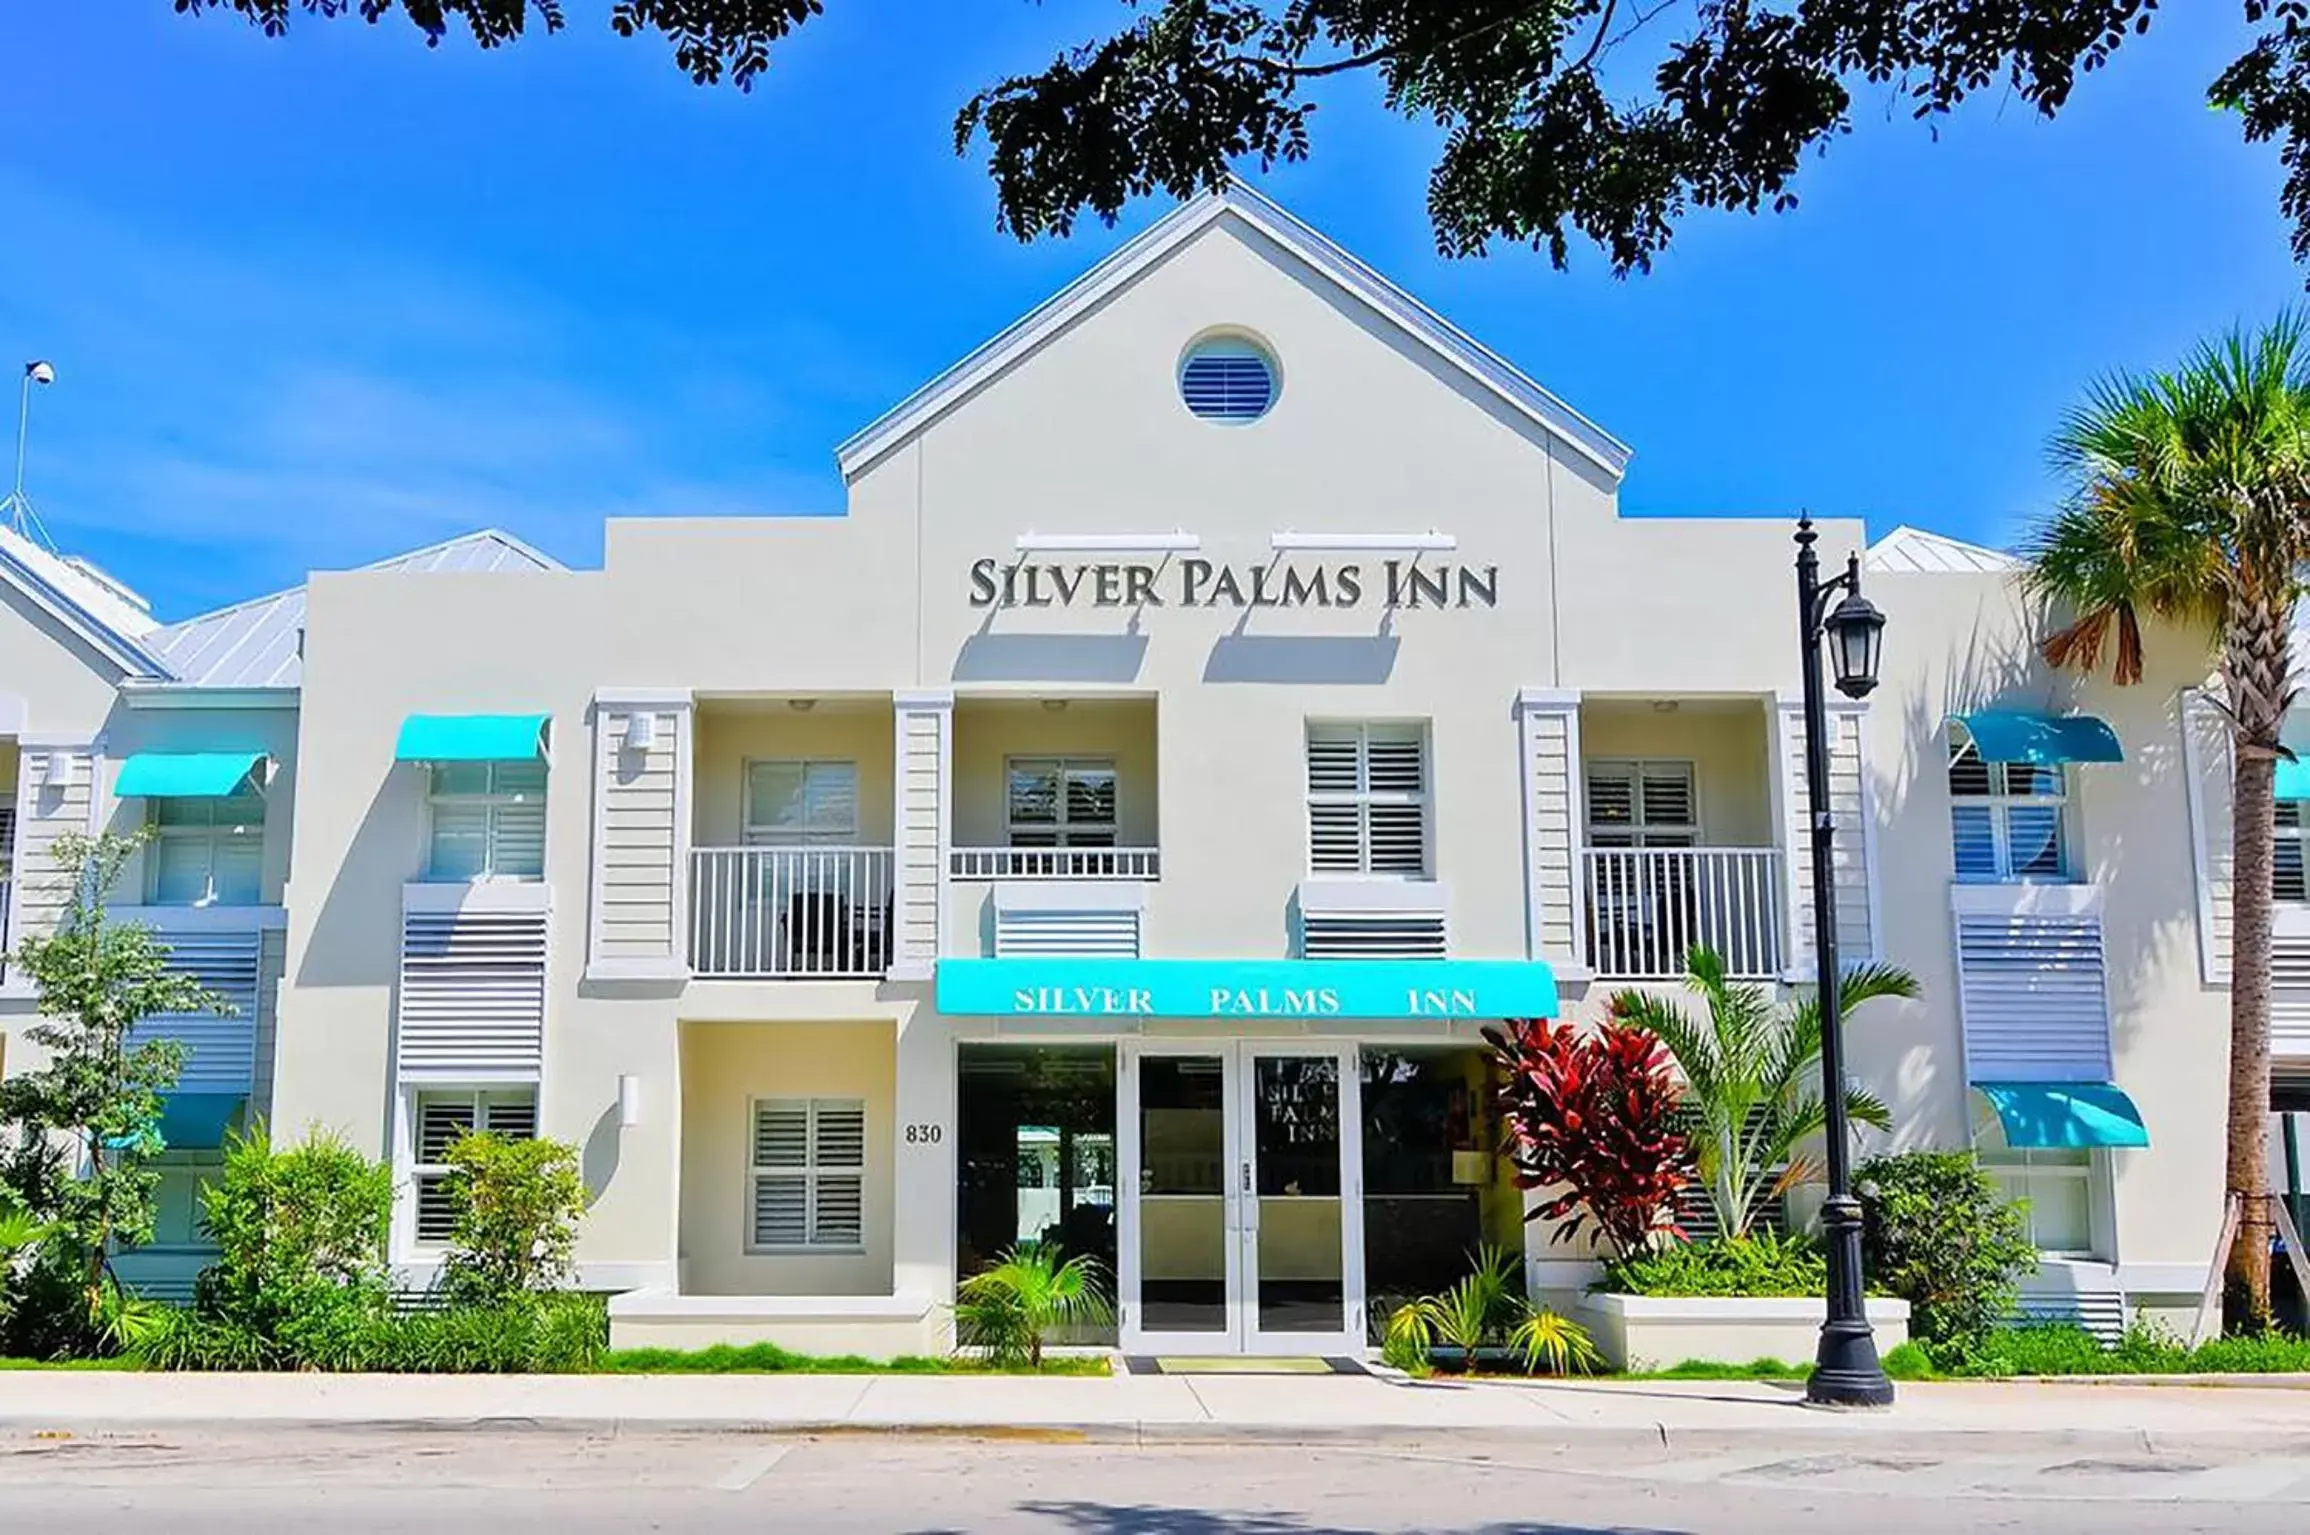 Property Building in Silver Palms Inn